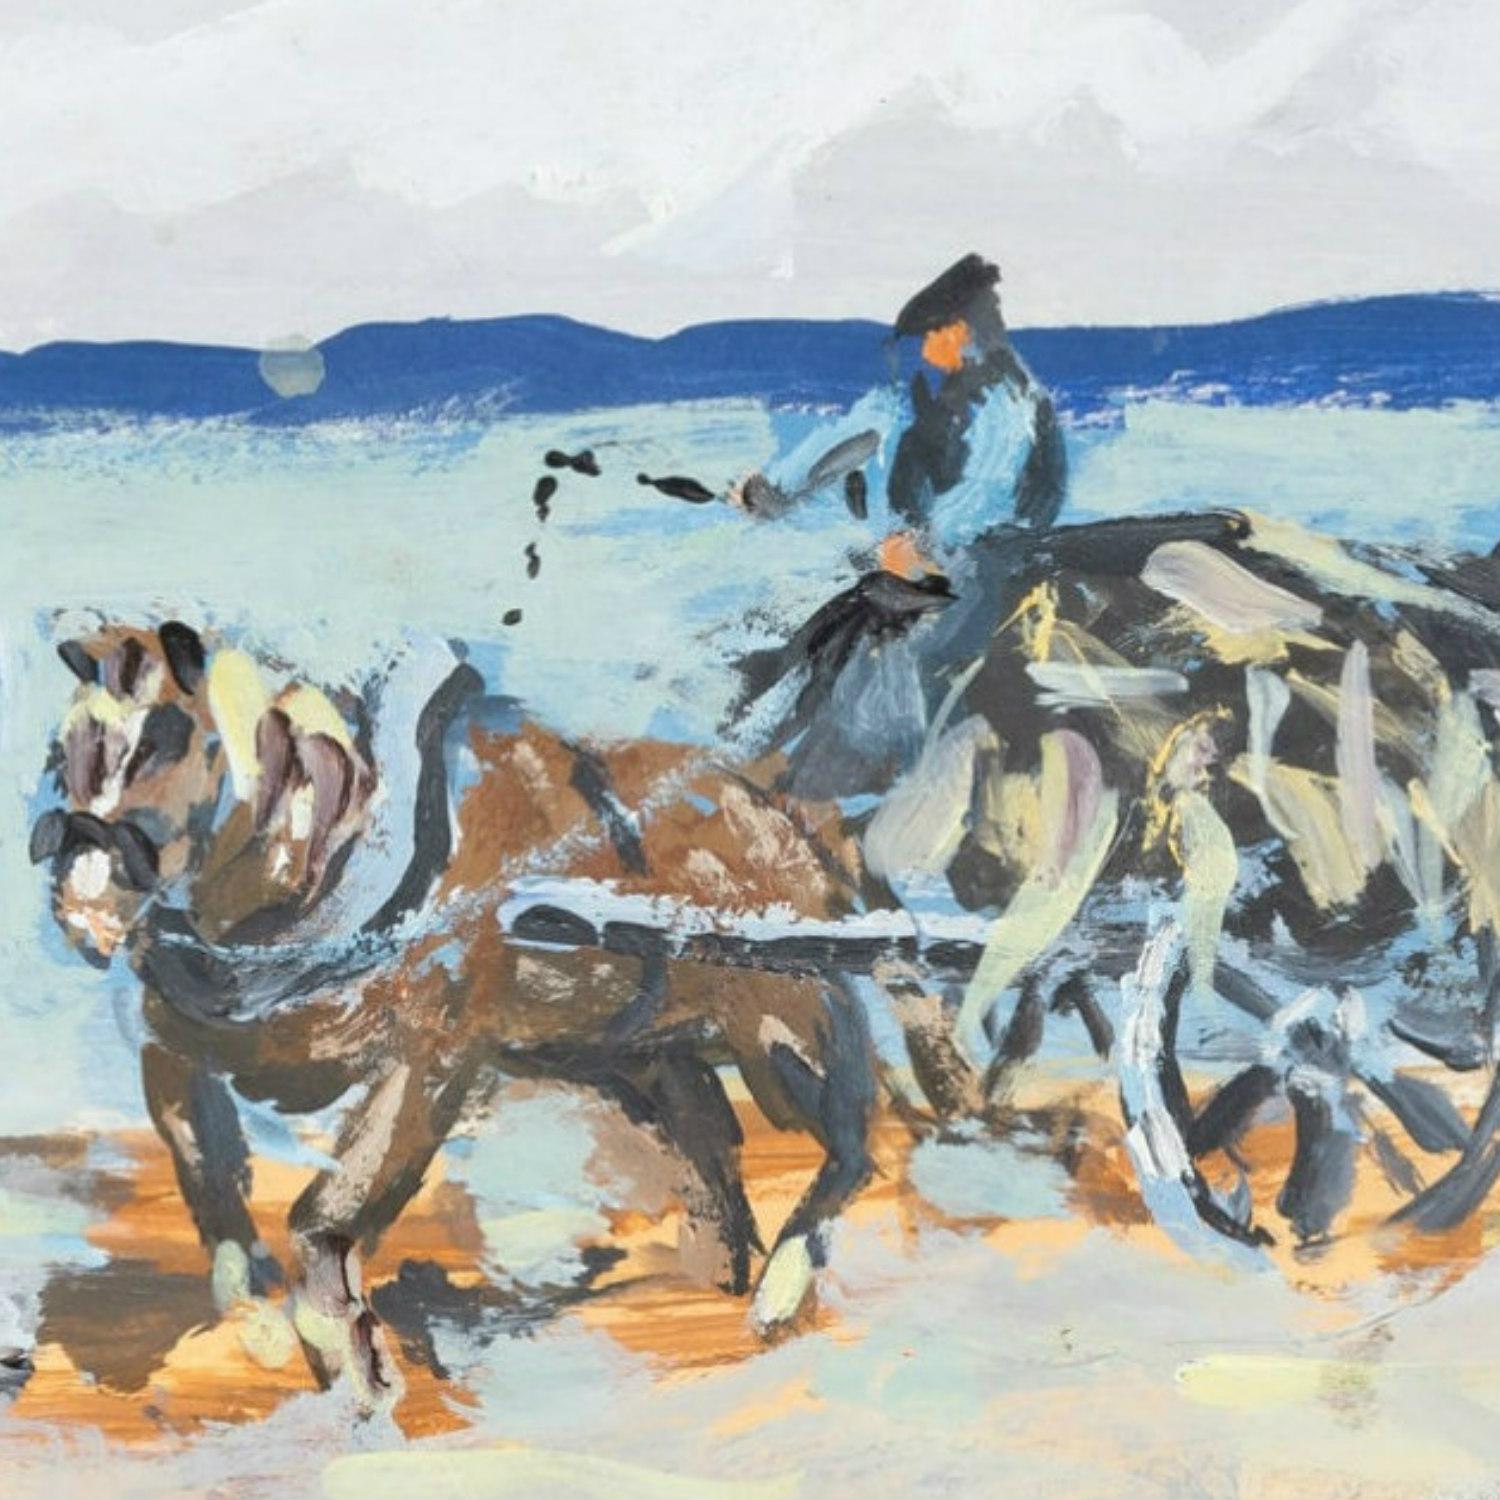 Contemporary Goémonier à Avranches by Fanch Lel, Small 2013 Gouache on Board Painting, Signed